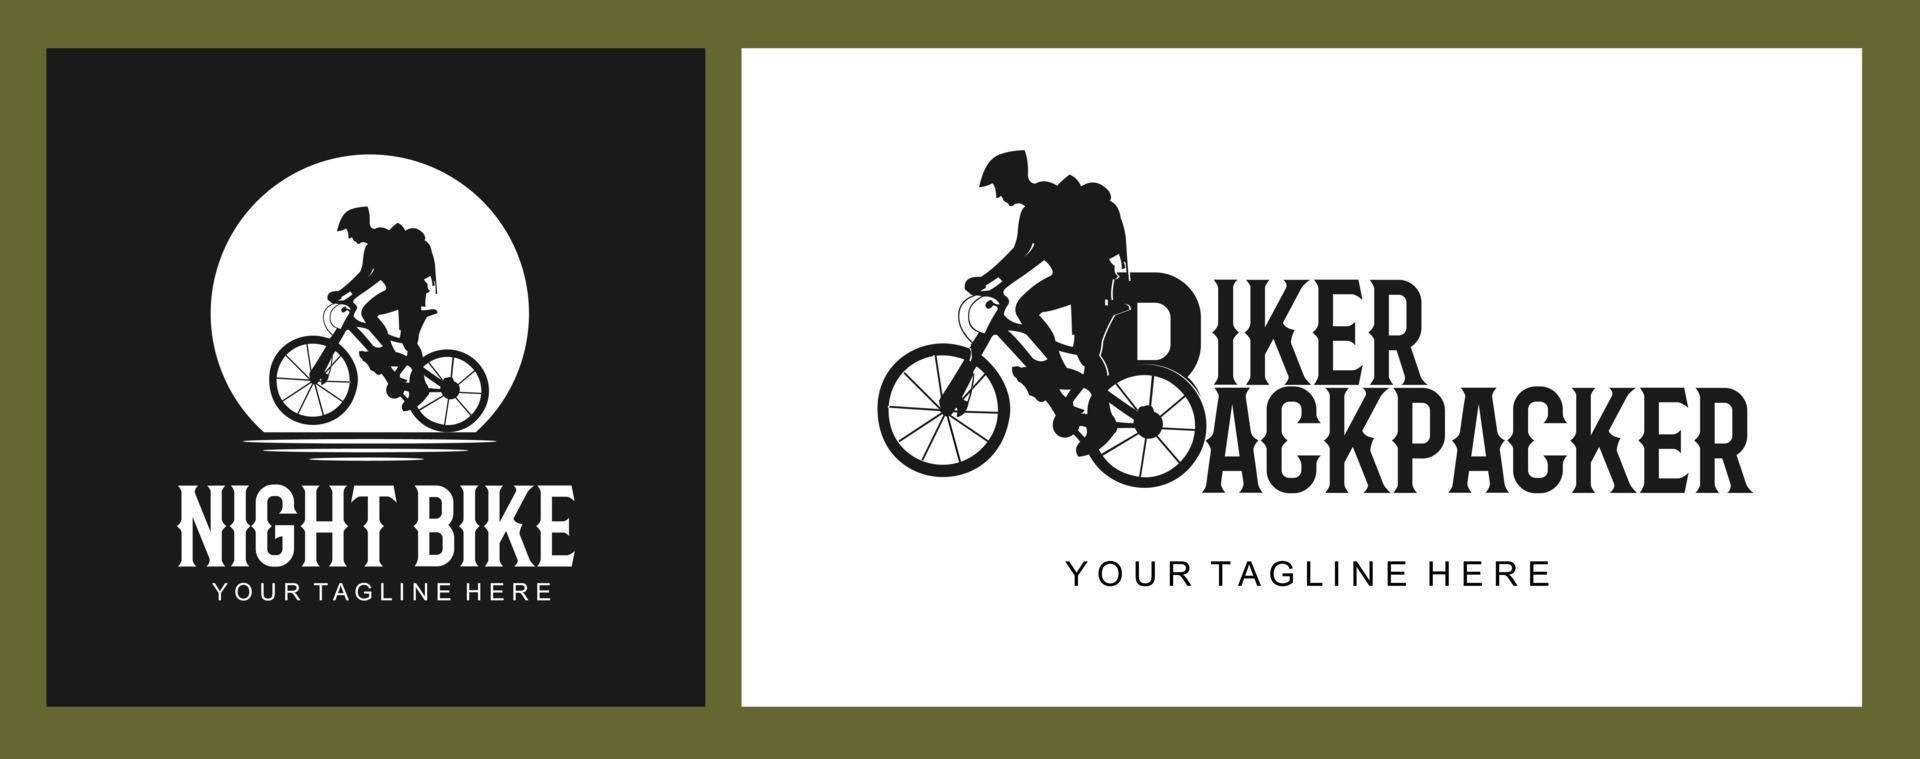 logo illustration male silhouette riding a bicycle vector